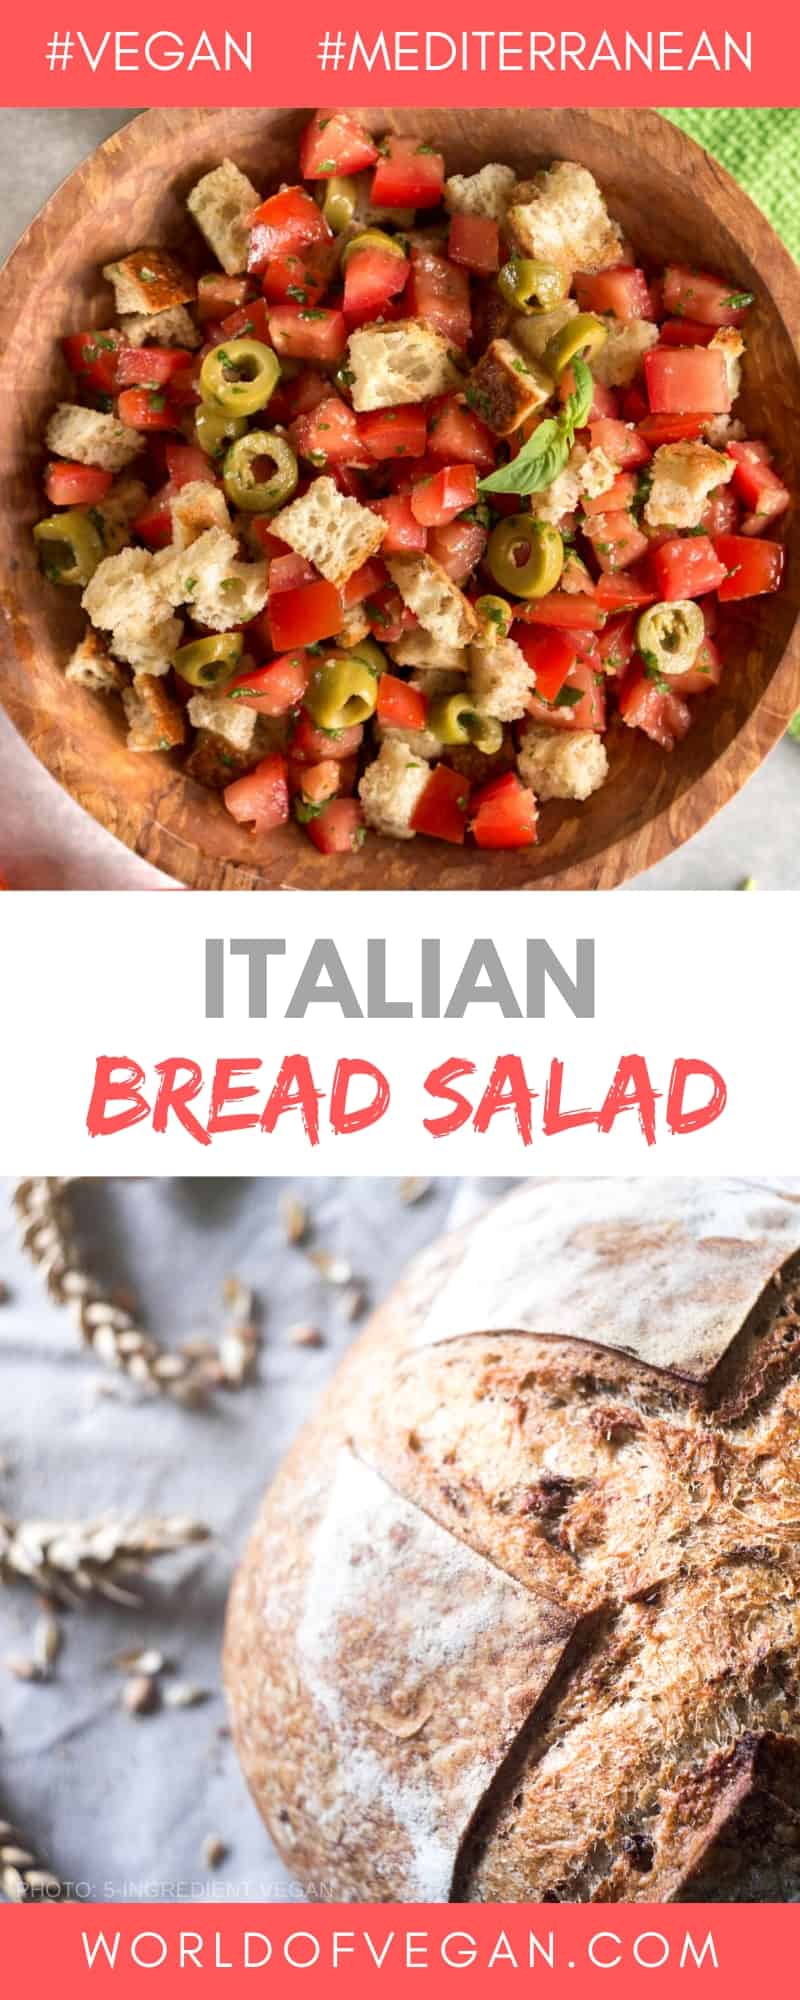 Simple Italian Tomato and Bread Salad in a wooden bowl with a loaf of fresh bakes bread